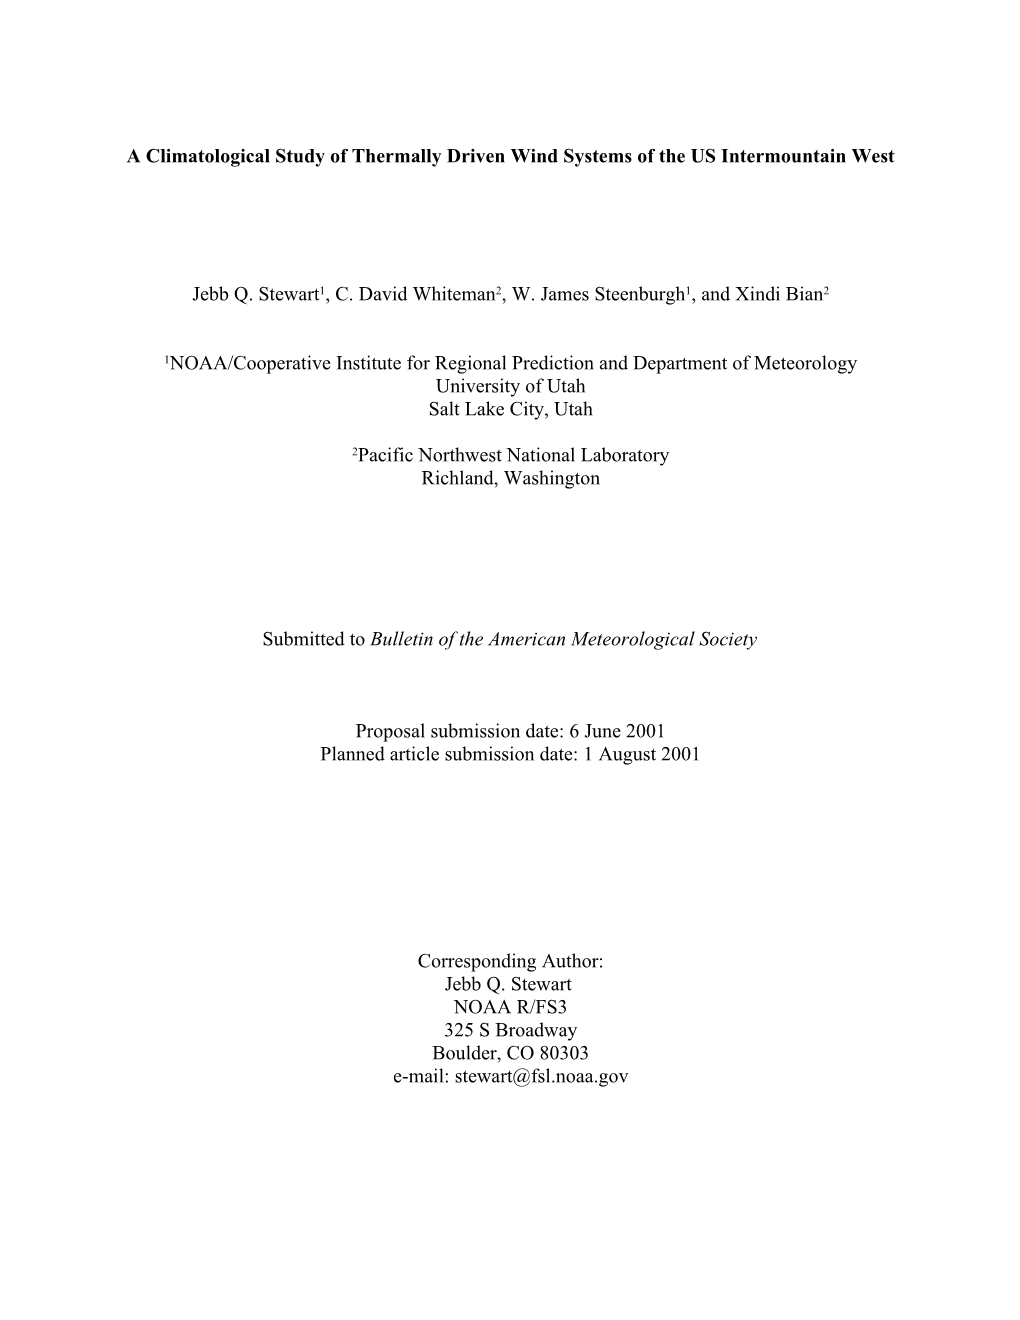 A Climatological Study of Thermally Driven Wind Systems of The